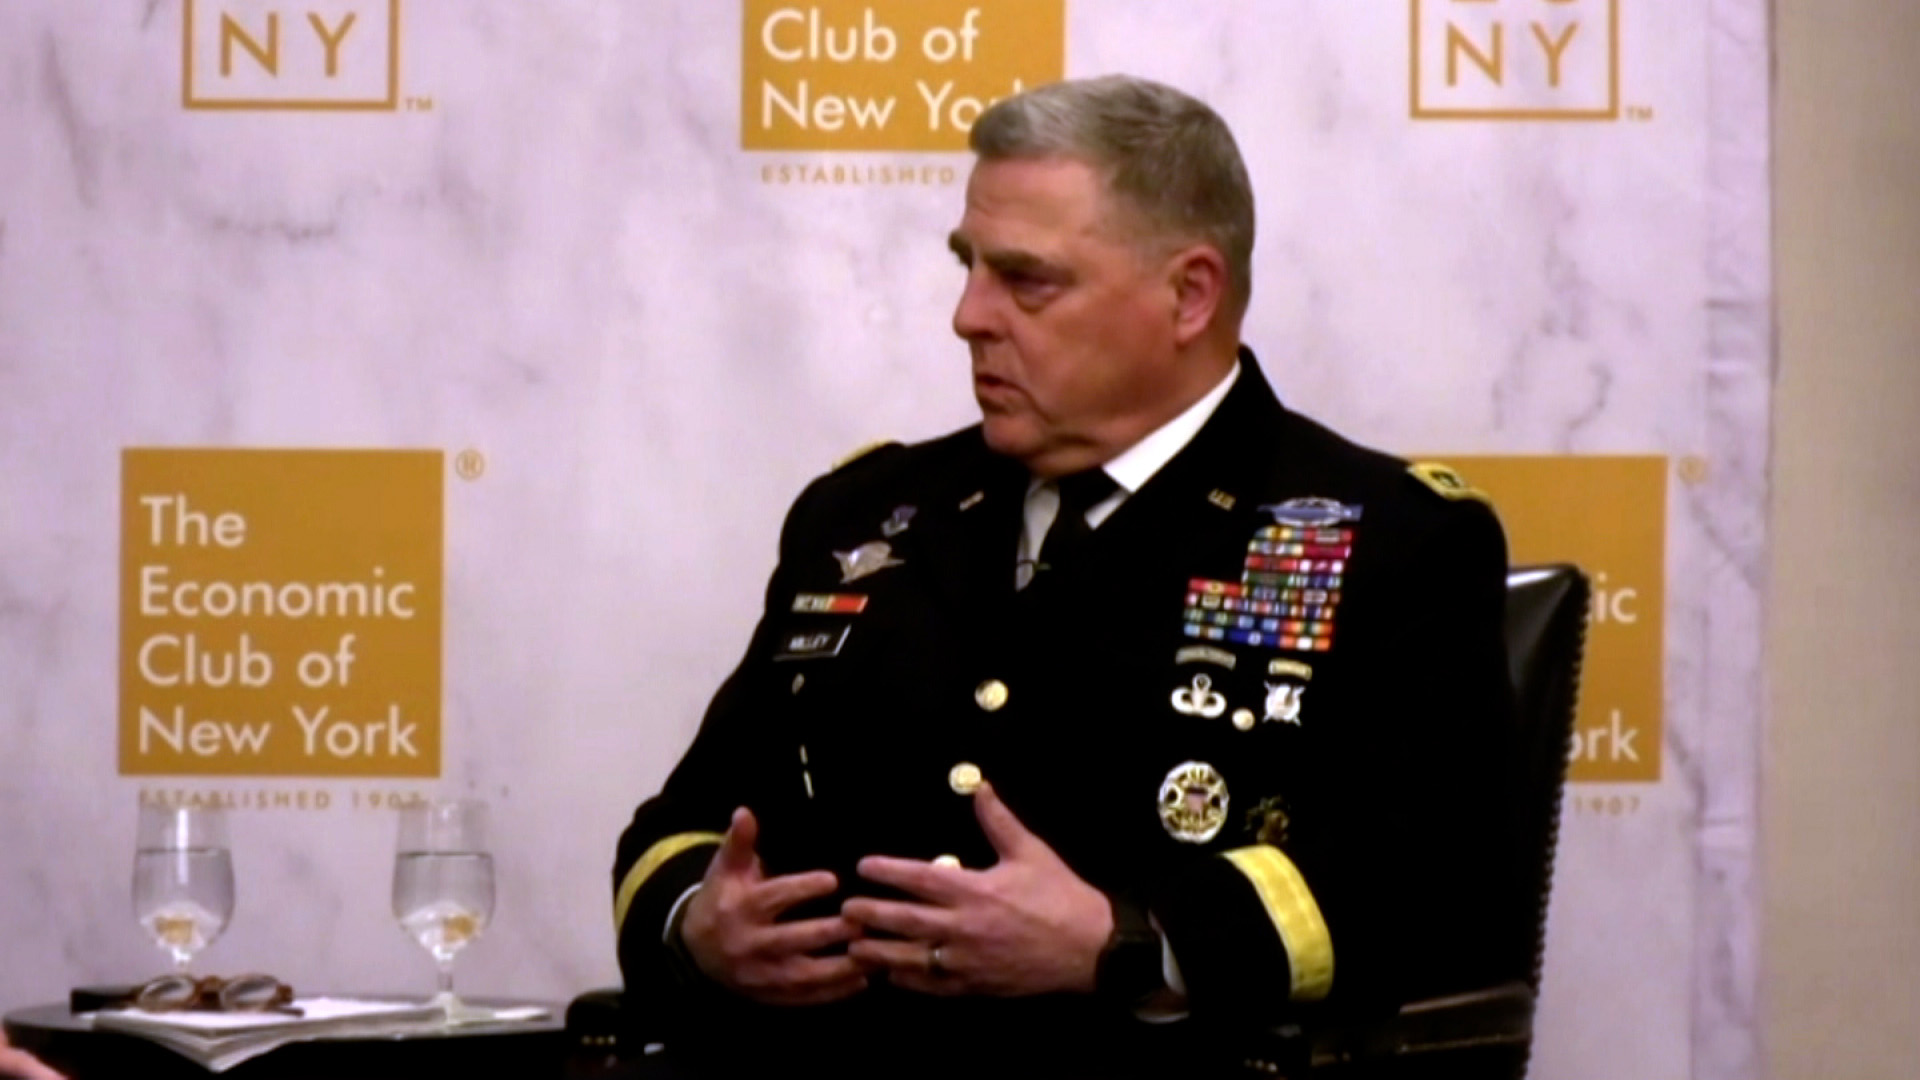 Speaking at an event for the Economic Club of New York on Wednesday, Nov. 9, Chairman of the Joint Chiefs of Staff Mark Milley called Russia's invasion of Ukraine a 